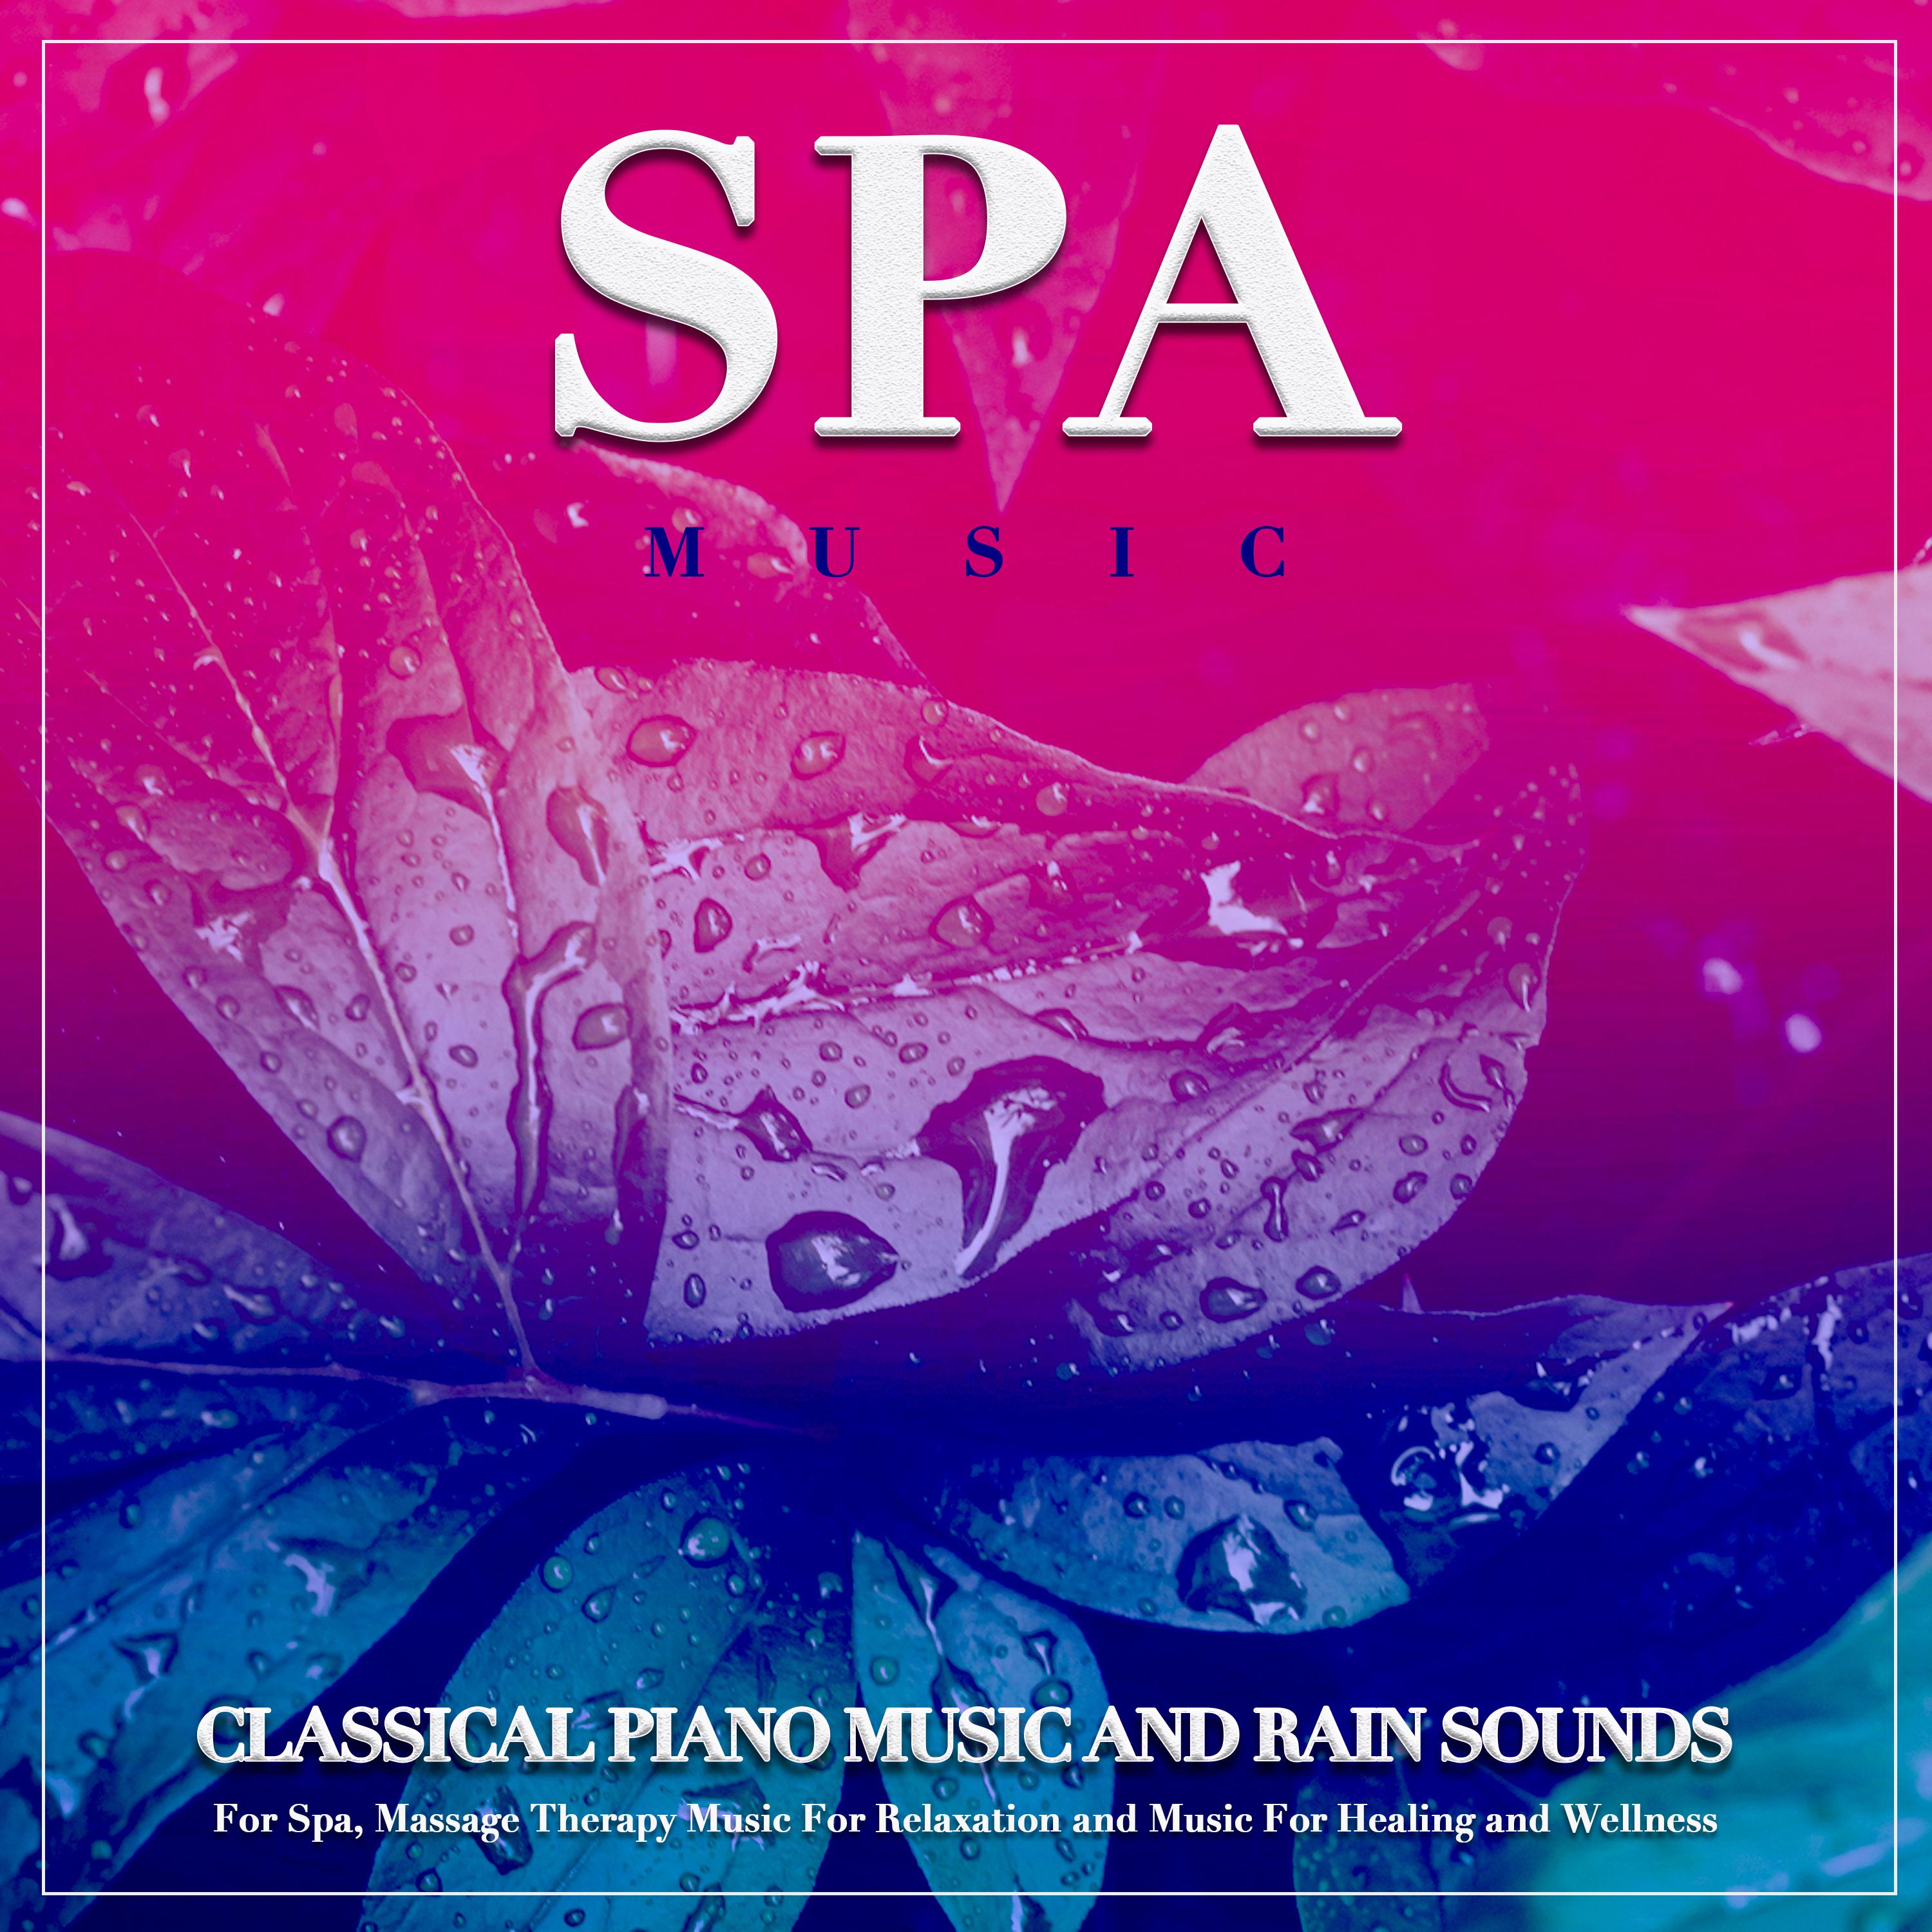 Spa Music: Classical Piano Music and Rain Sounds For Spa, Massage Therapy Music For Relaxation and Music For Healing and Wellness